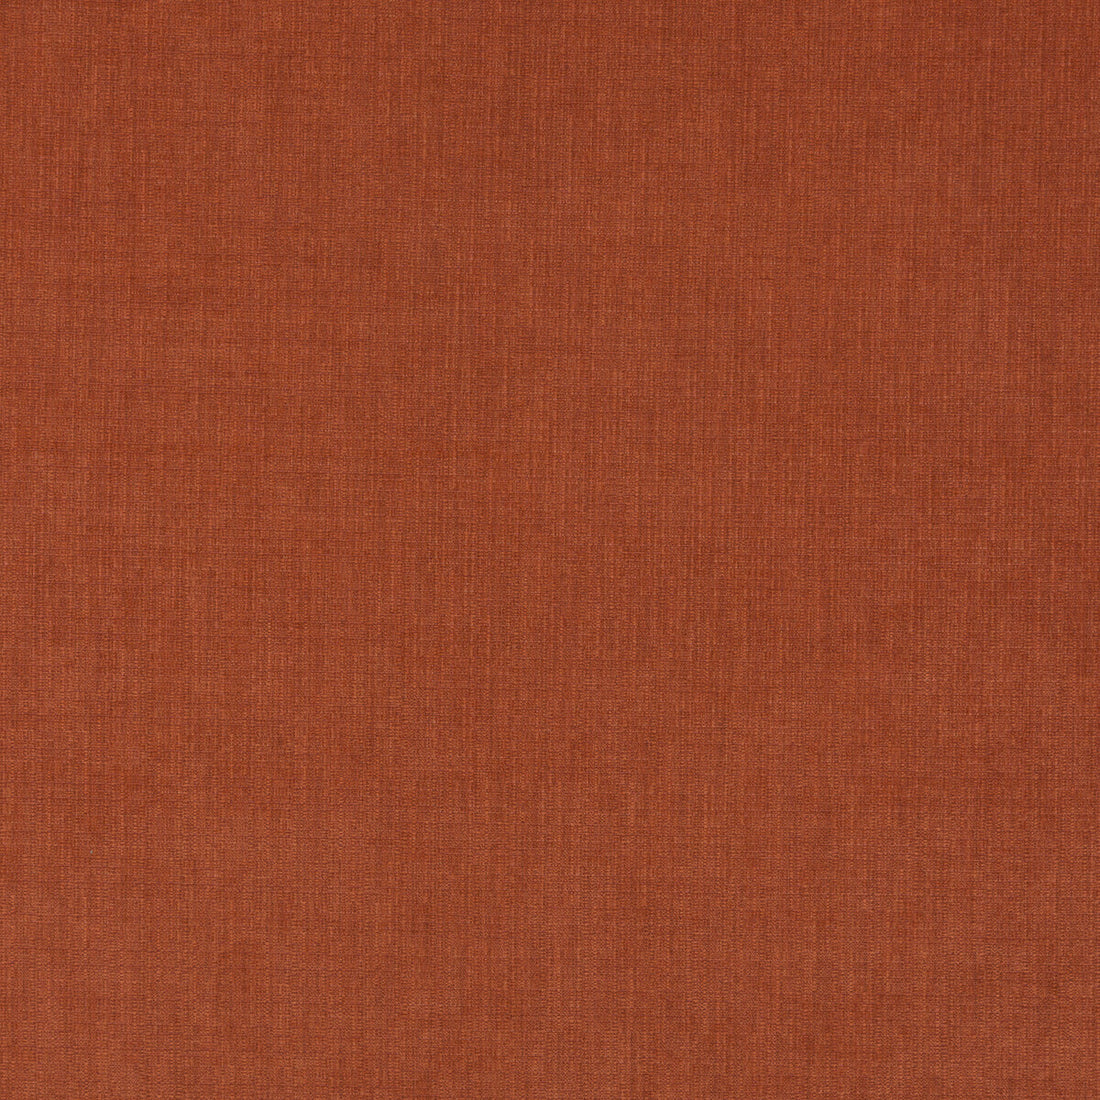 Blizzard fabric in spice color - pattern BF10684.330.0 - by G P &amp; J Baker in the Essential Colours II collection